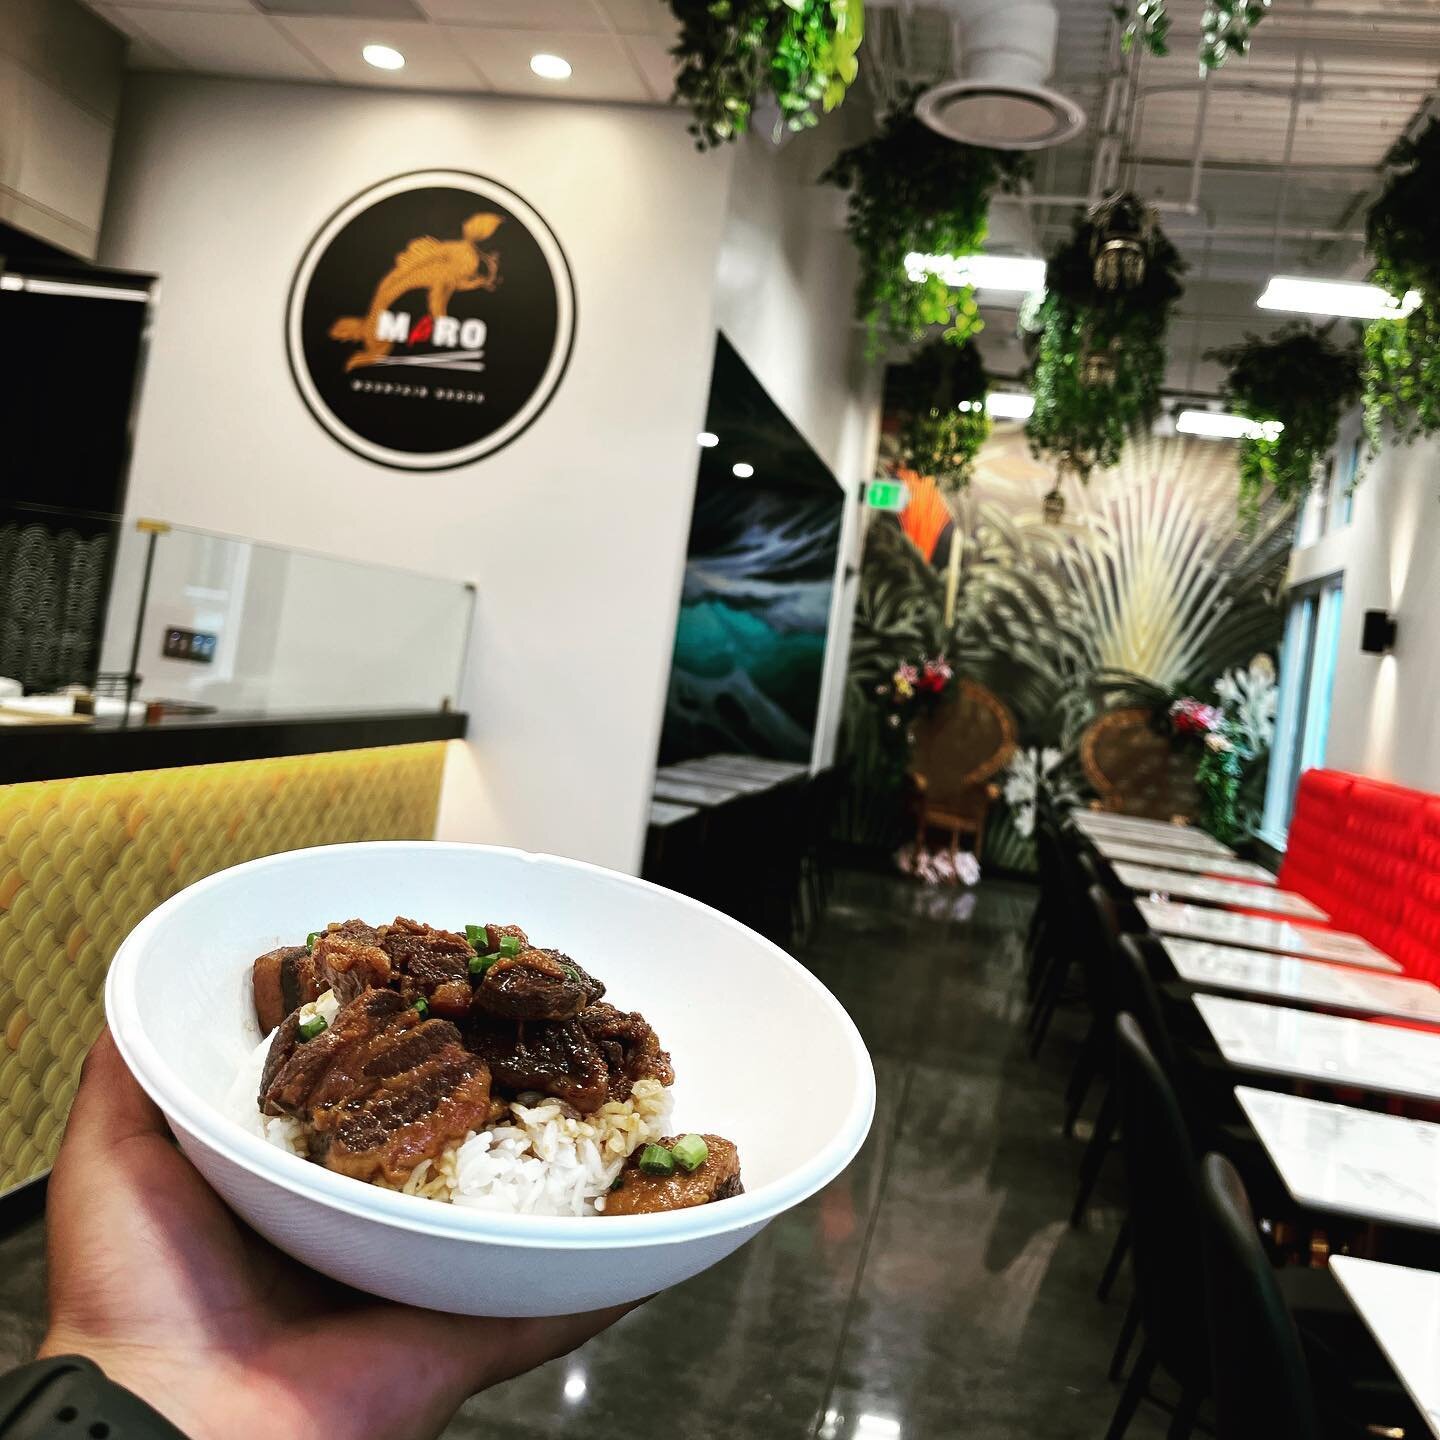 First meal by Abhi at Maro 
Belly Butt Pork Adobo 🤤 
Enjoyed by and with the Crew.